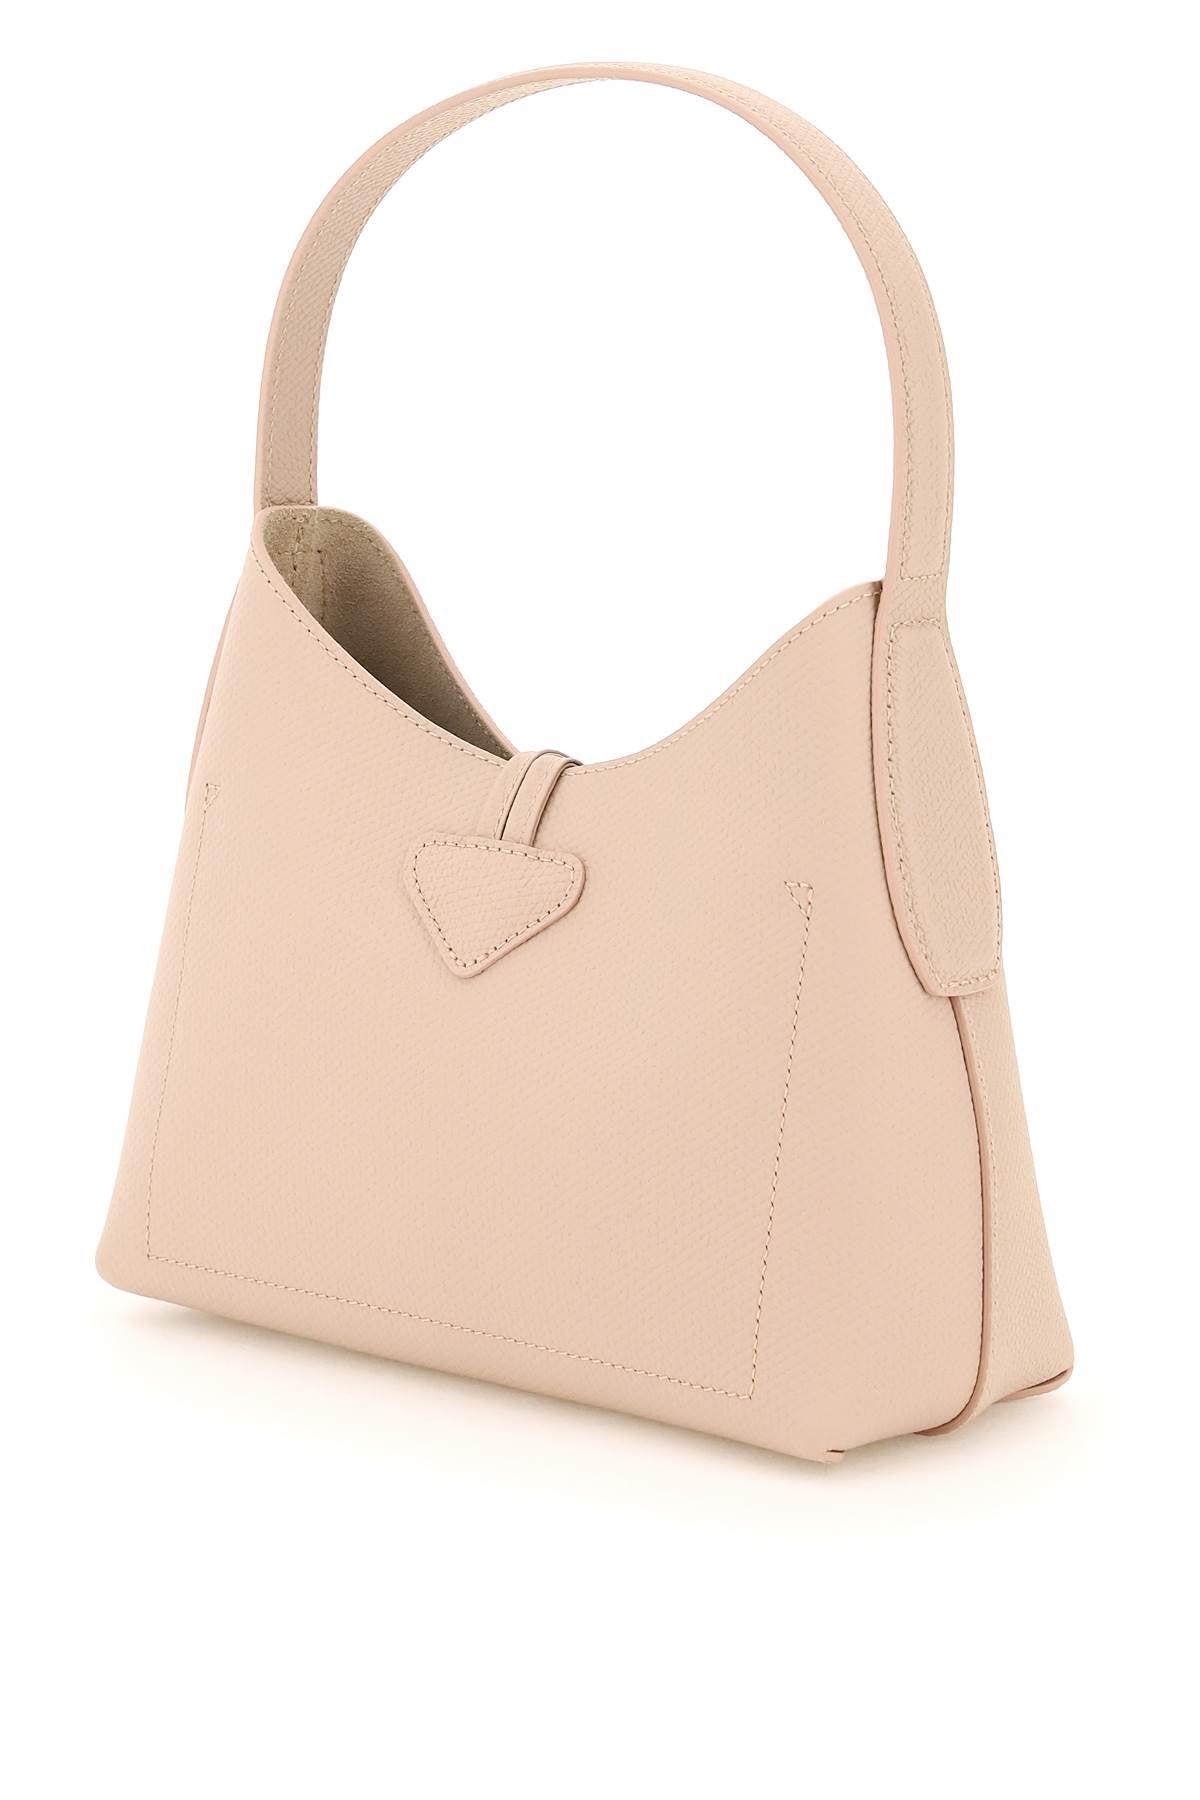 The New Longchamp Roseau Crossbody Bag XS Is A Delectable Delight -  BAGAHOLICBOY